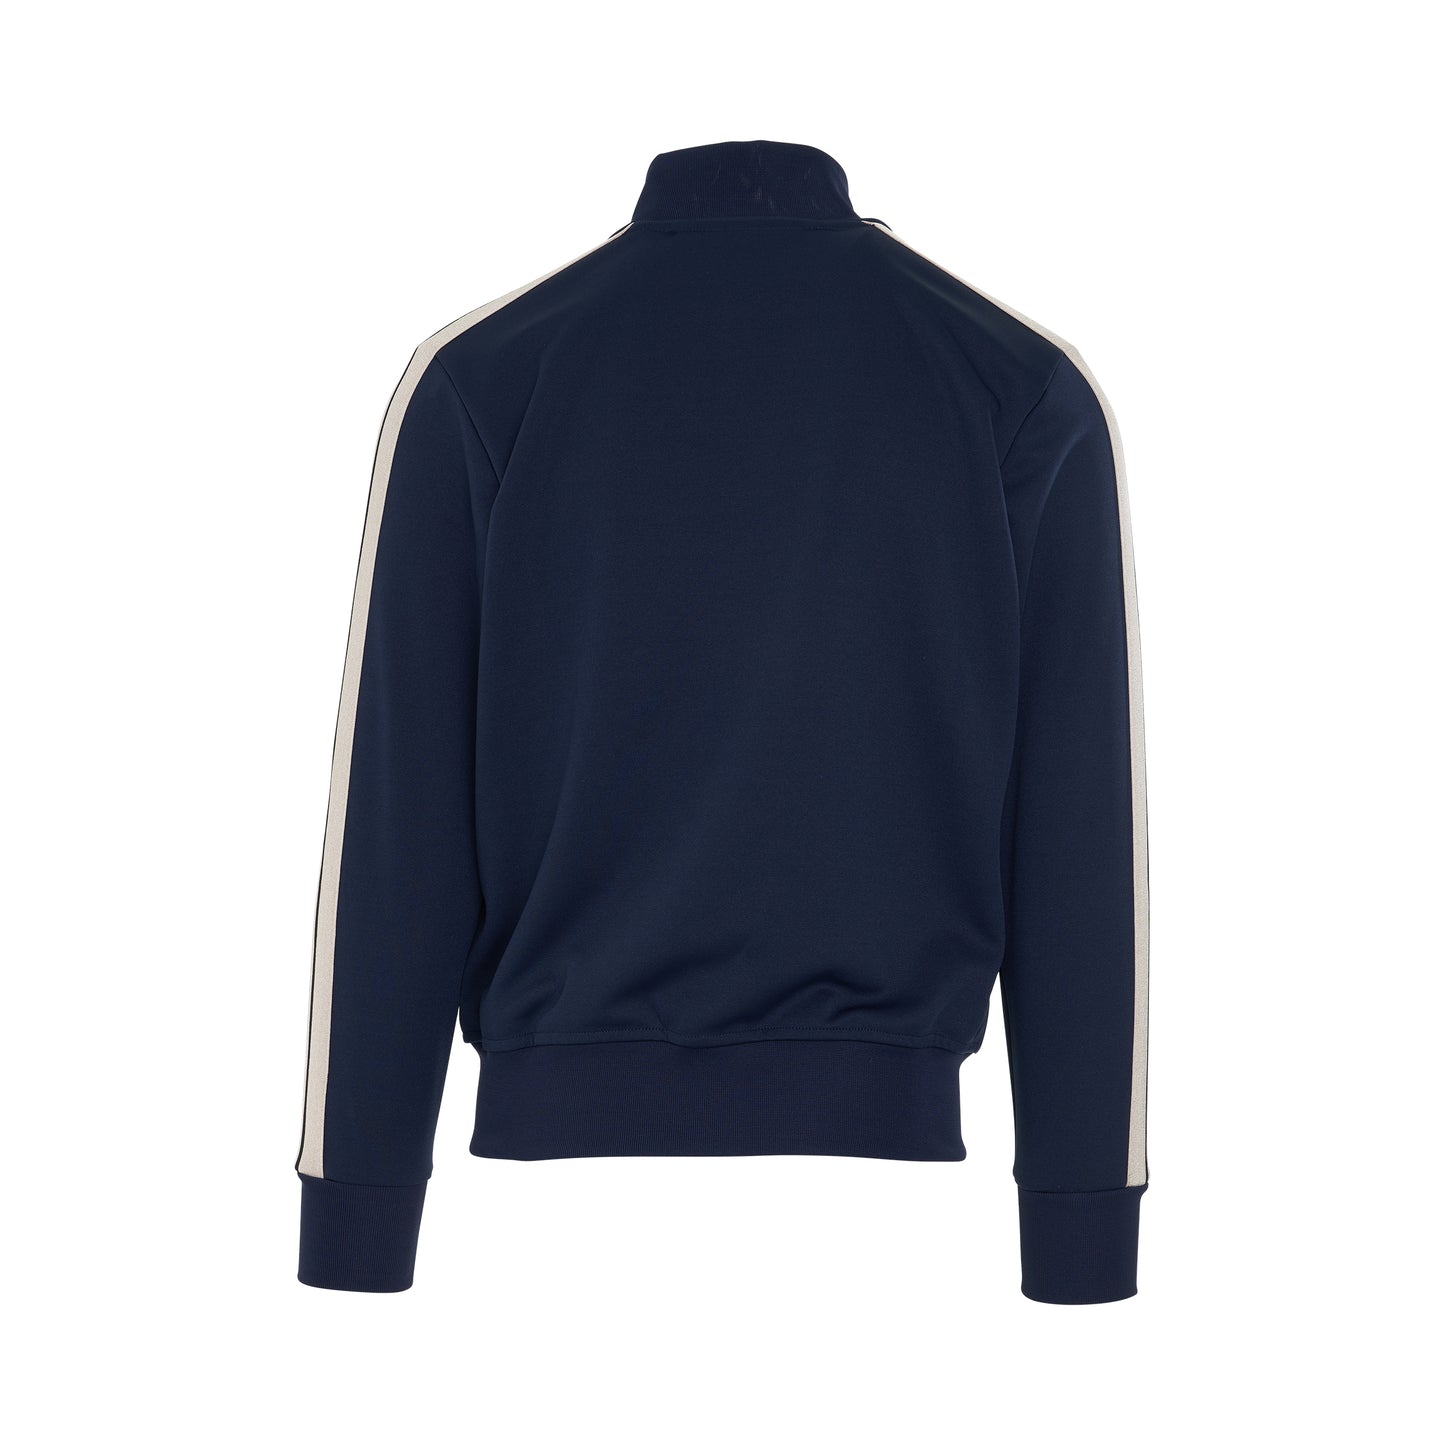 Classic Track Jacket in Navy Blue/White